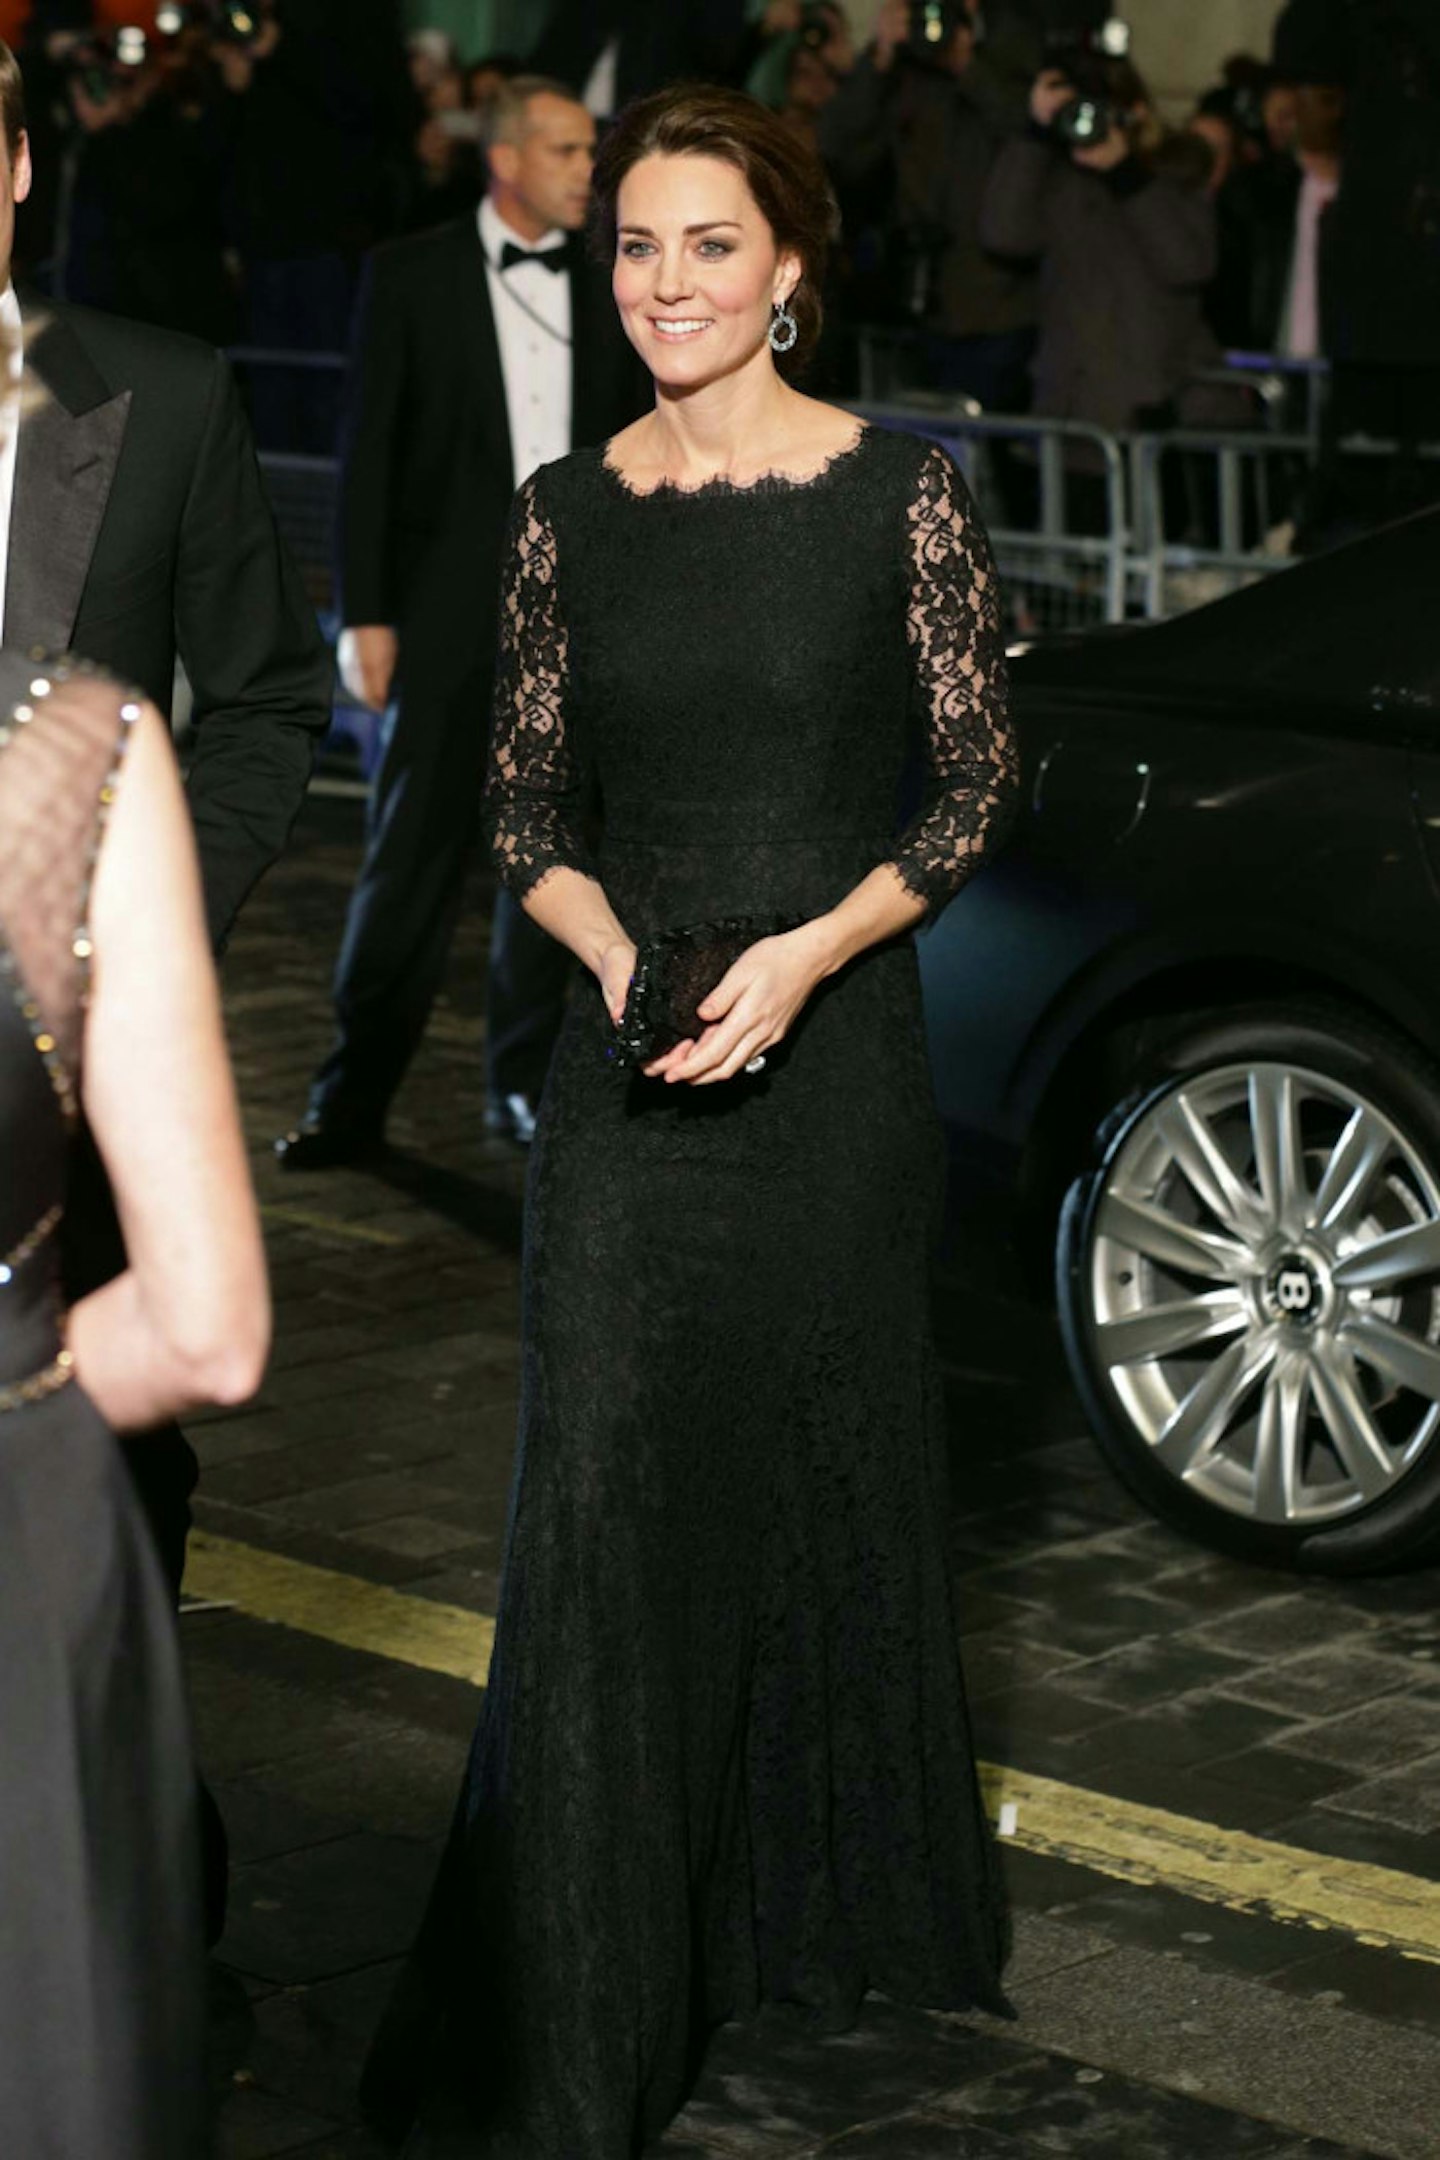 The Duchess Of Cambridge wears DVF dress at The Royal Variety Performance, 13 November 2014